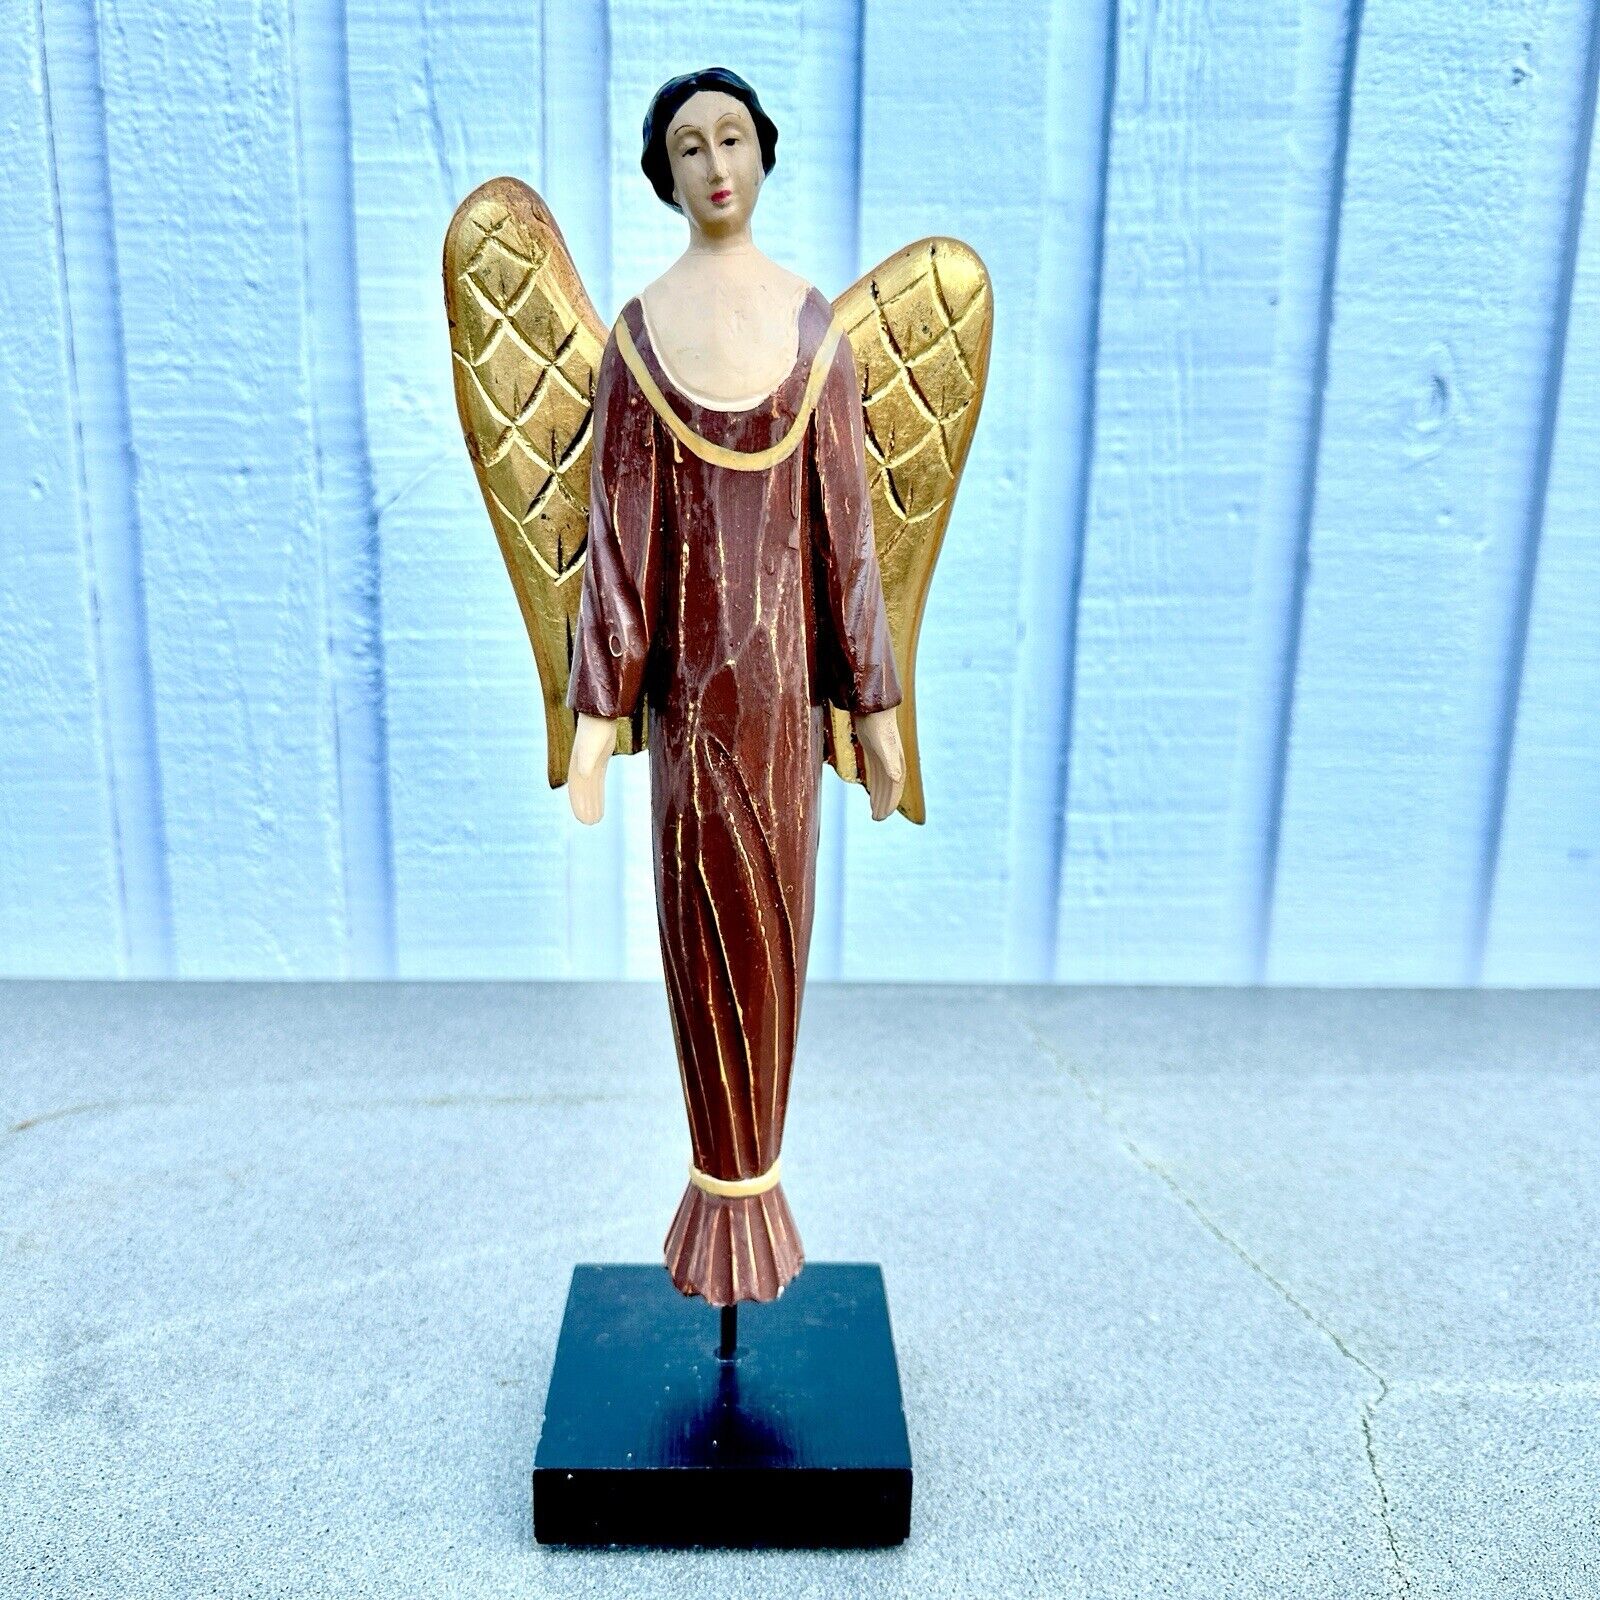 Vtg Handmade OOAK Carved Wooden Angel SANTOS REPLICA 14.5 Inches Tall Gold Wings